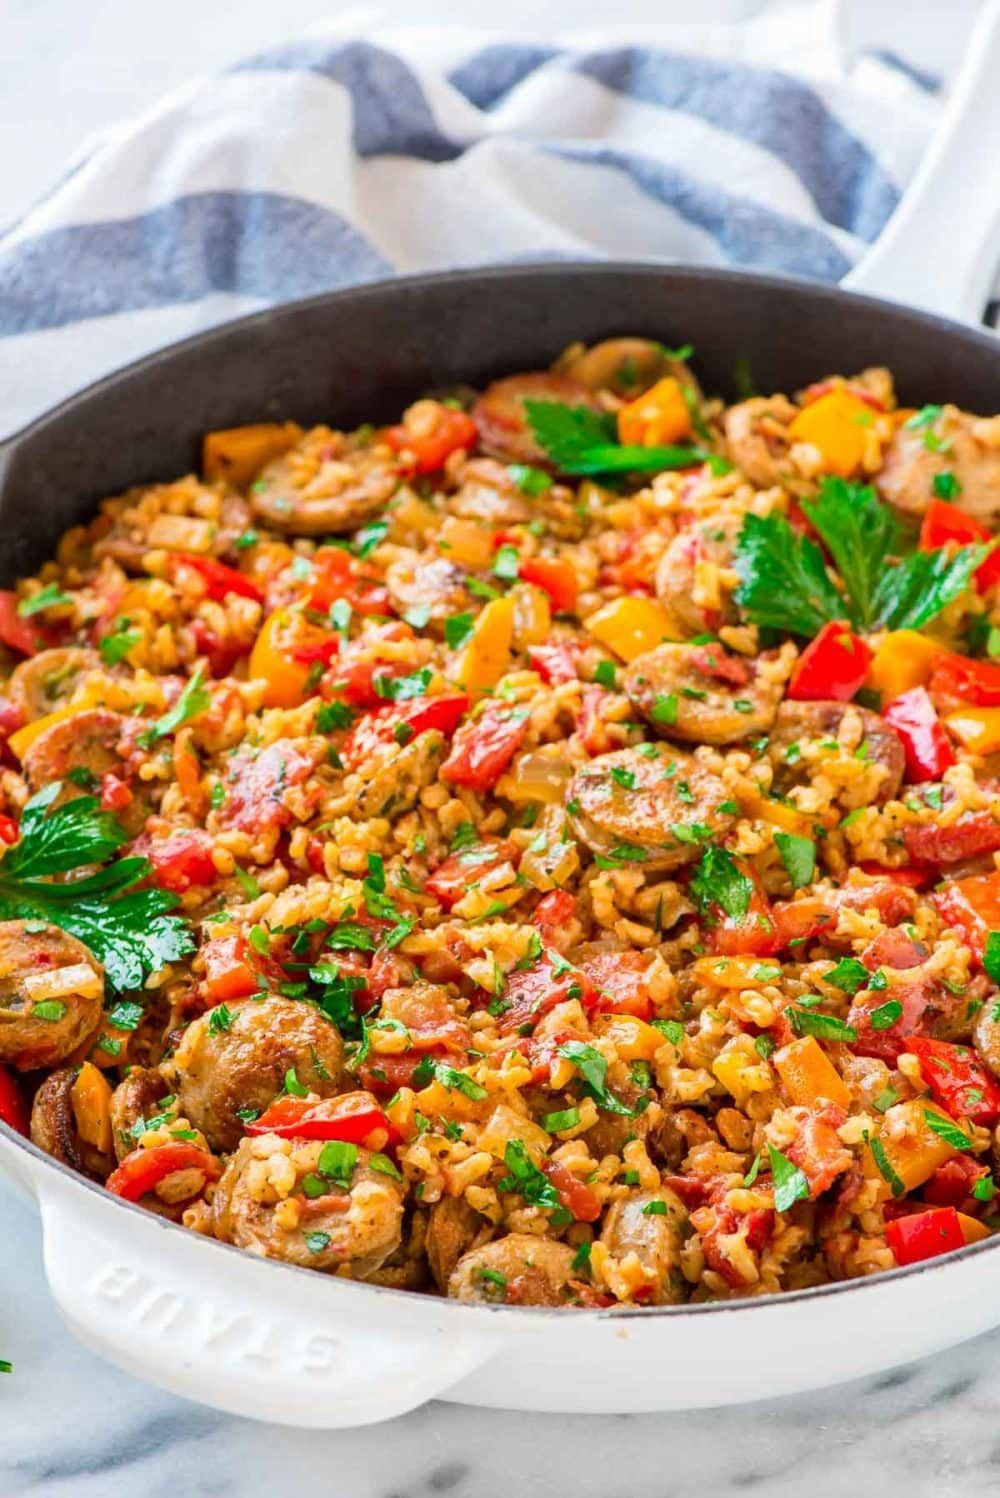 Easy Italian Sausage Recipes Inspirational Italian Sausage and Rice Casserole with Peppers